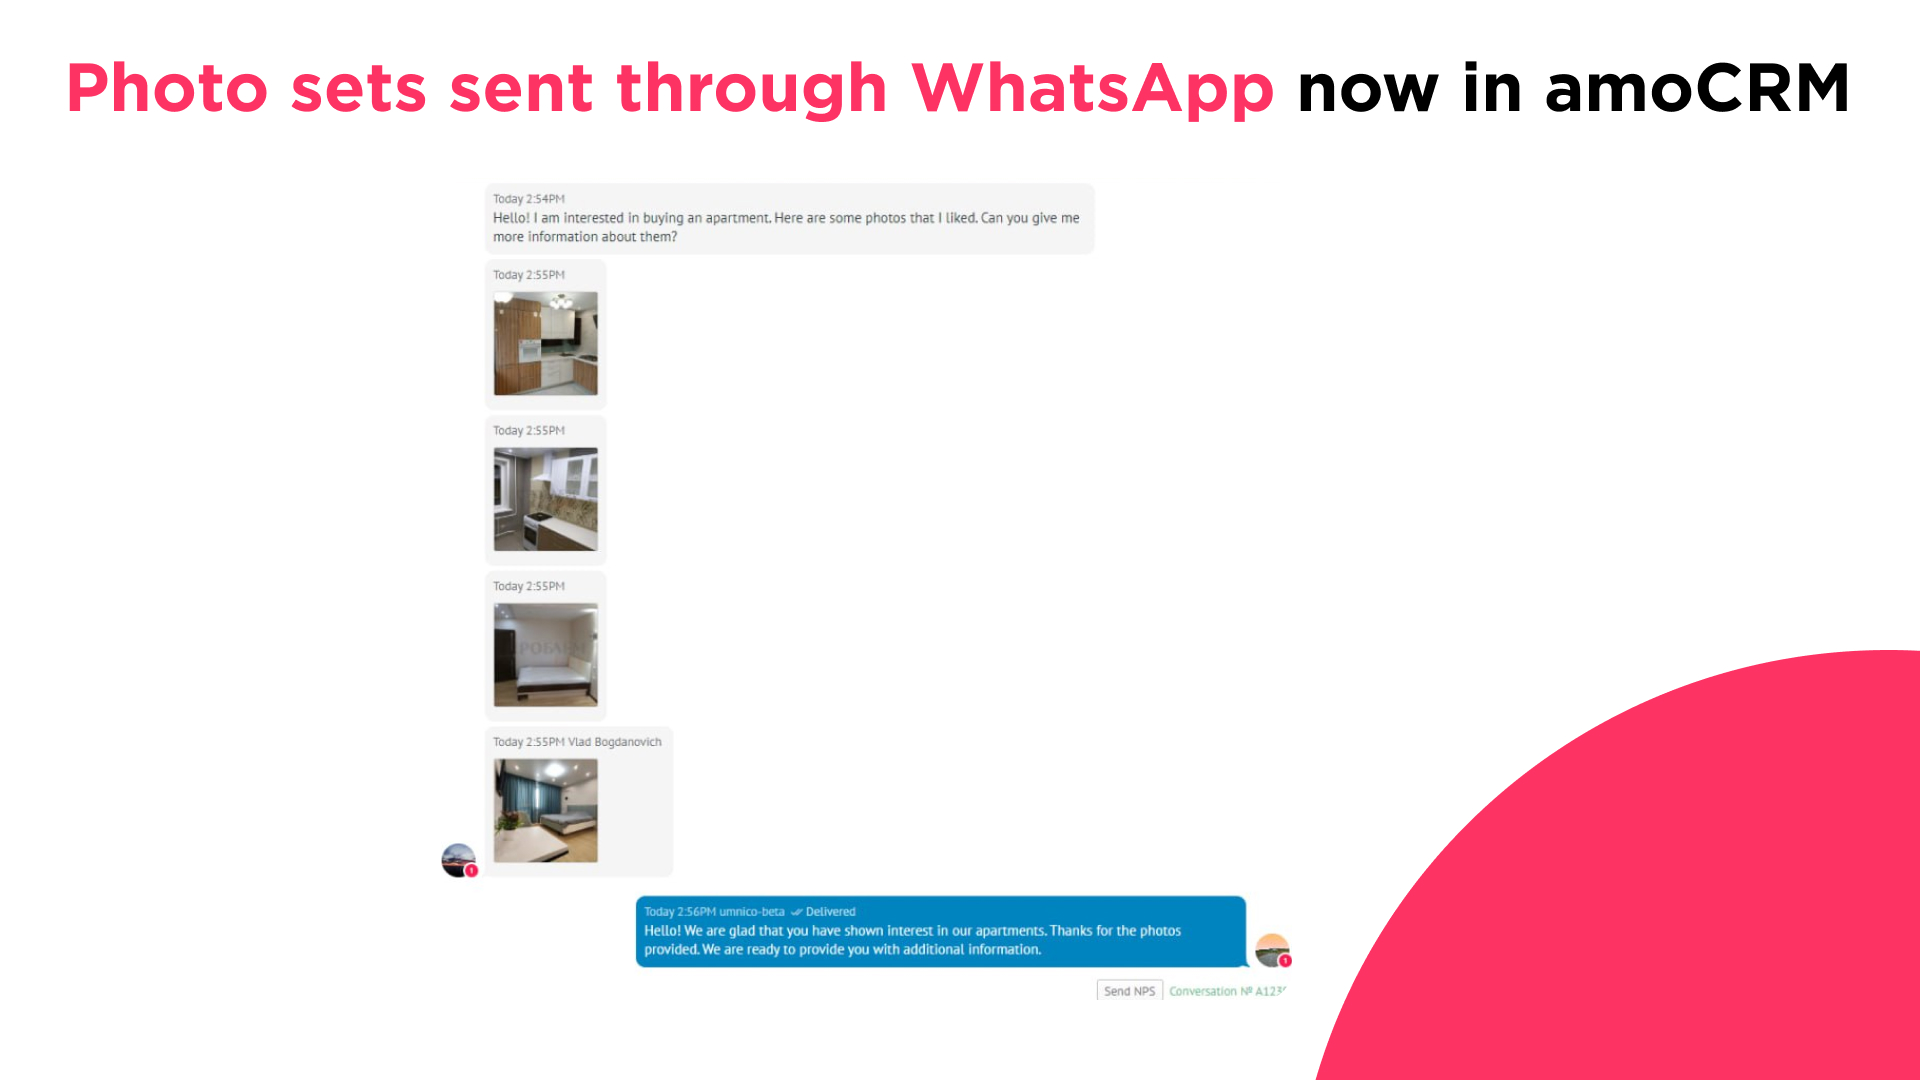 Photo sets sent through WhatsApp now in amoCRM